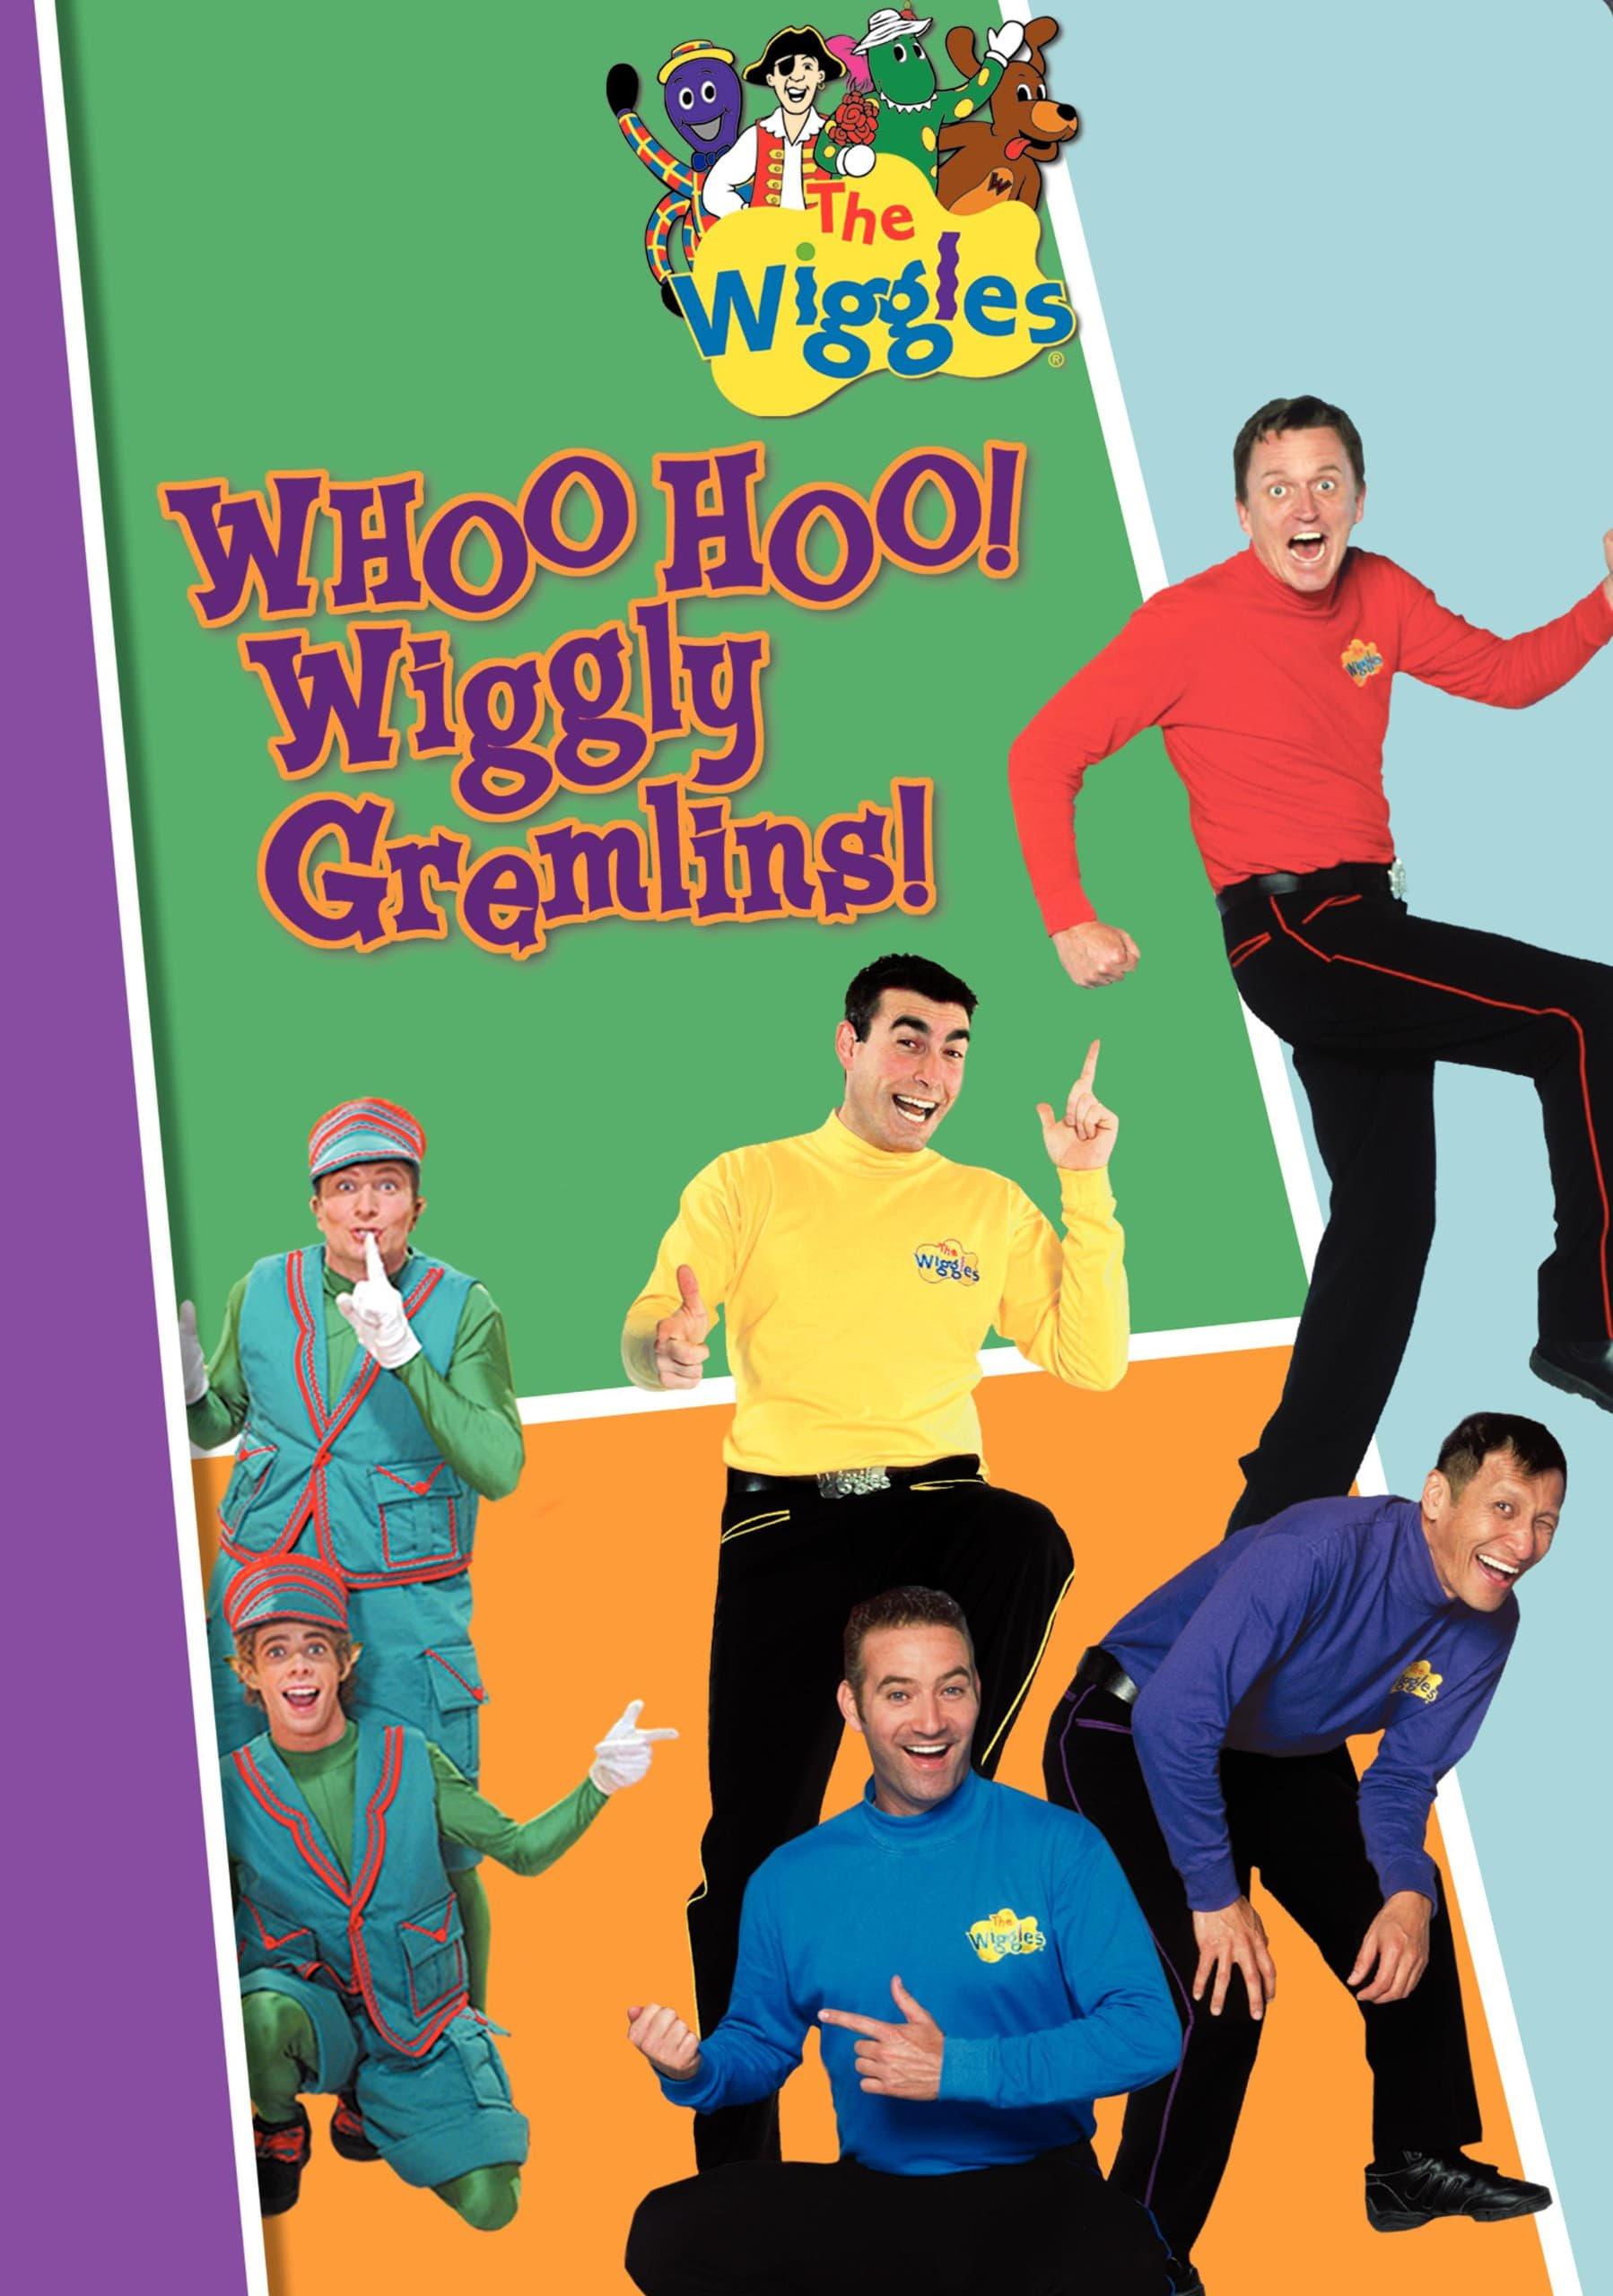 The Wiggles: Whoo Hoo! Wiggly Gremlins! poster